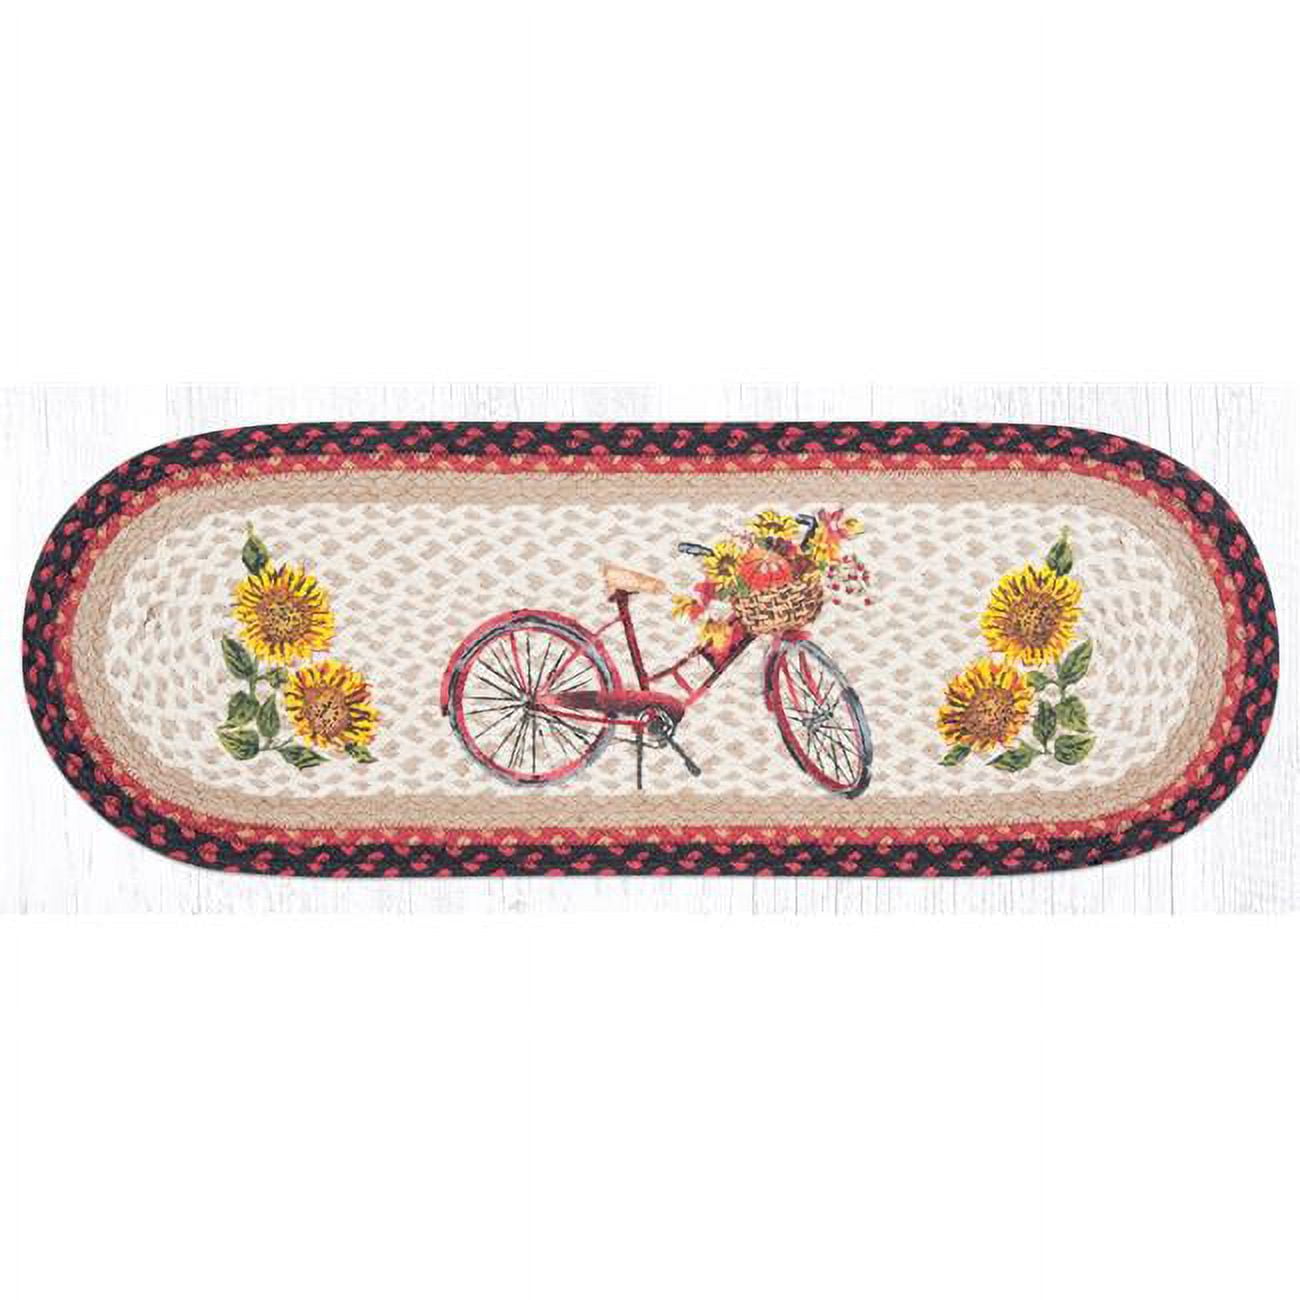 Picture of Capitol Importing 68-602RB 13 x 36 in. OP-602 Red Bicycle Oval Patch Runner